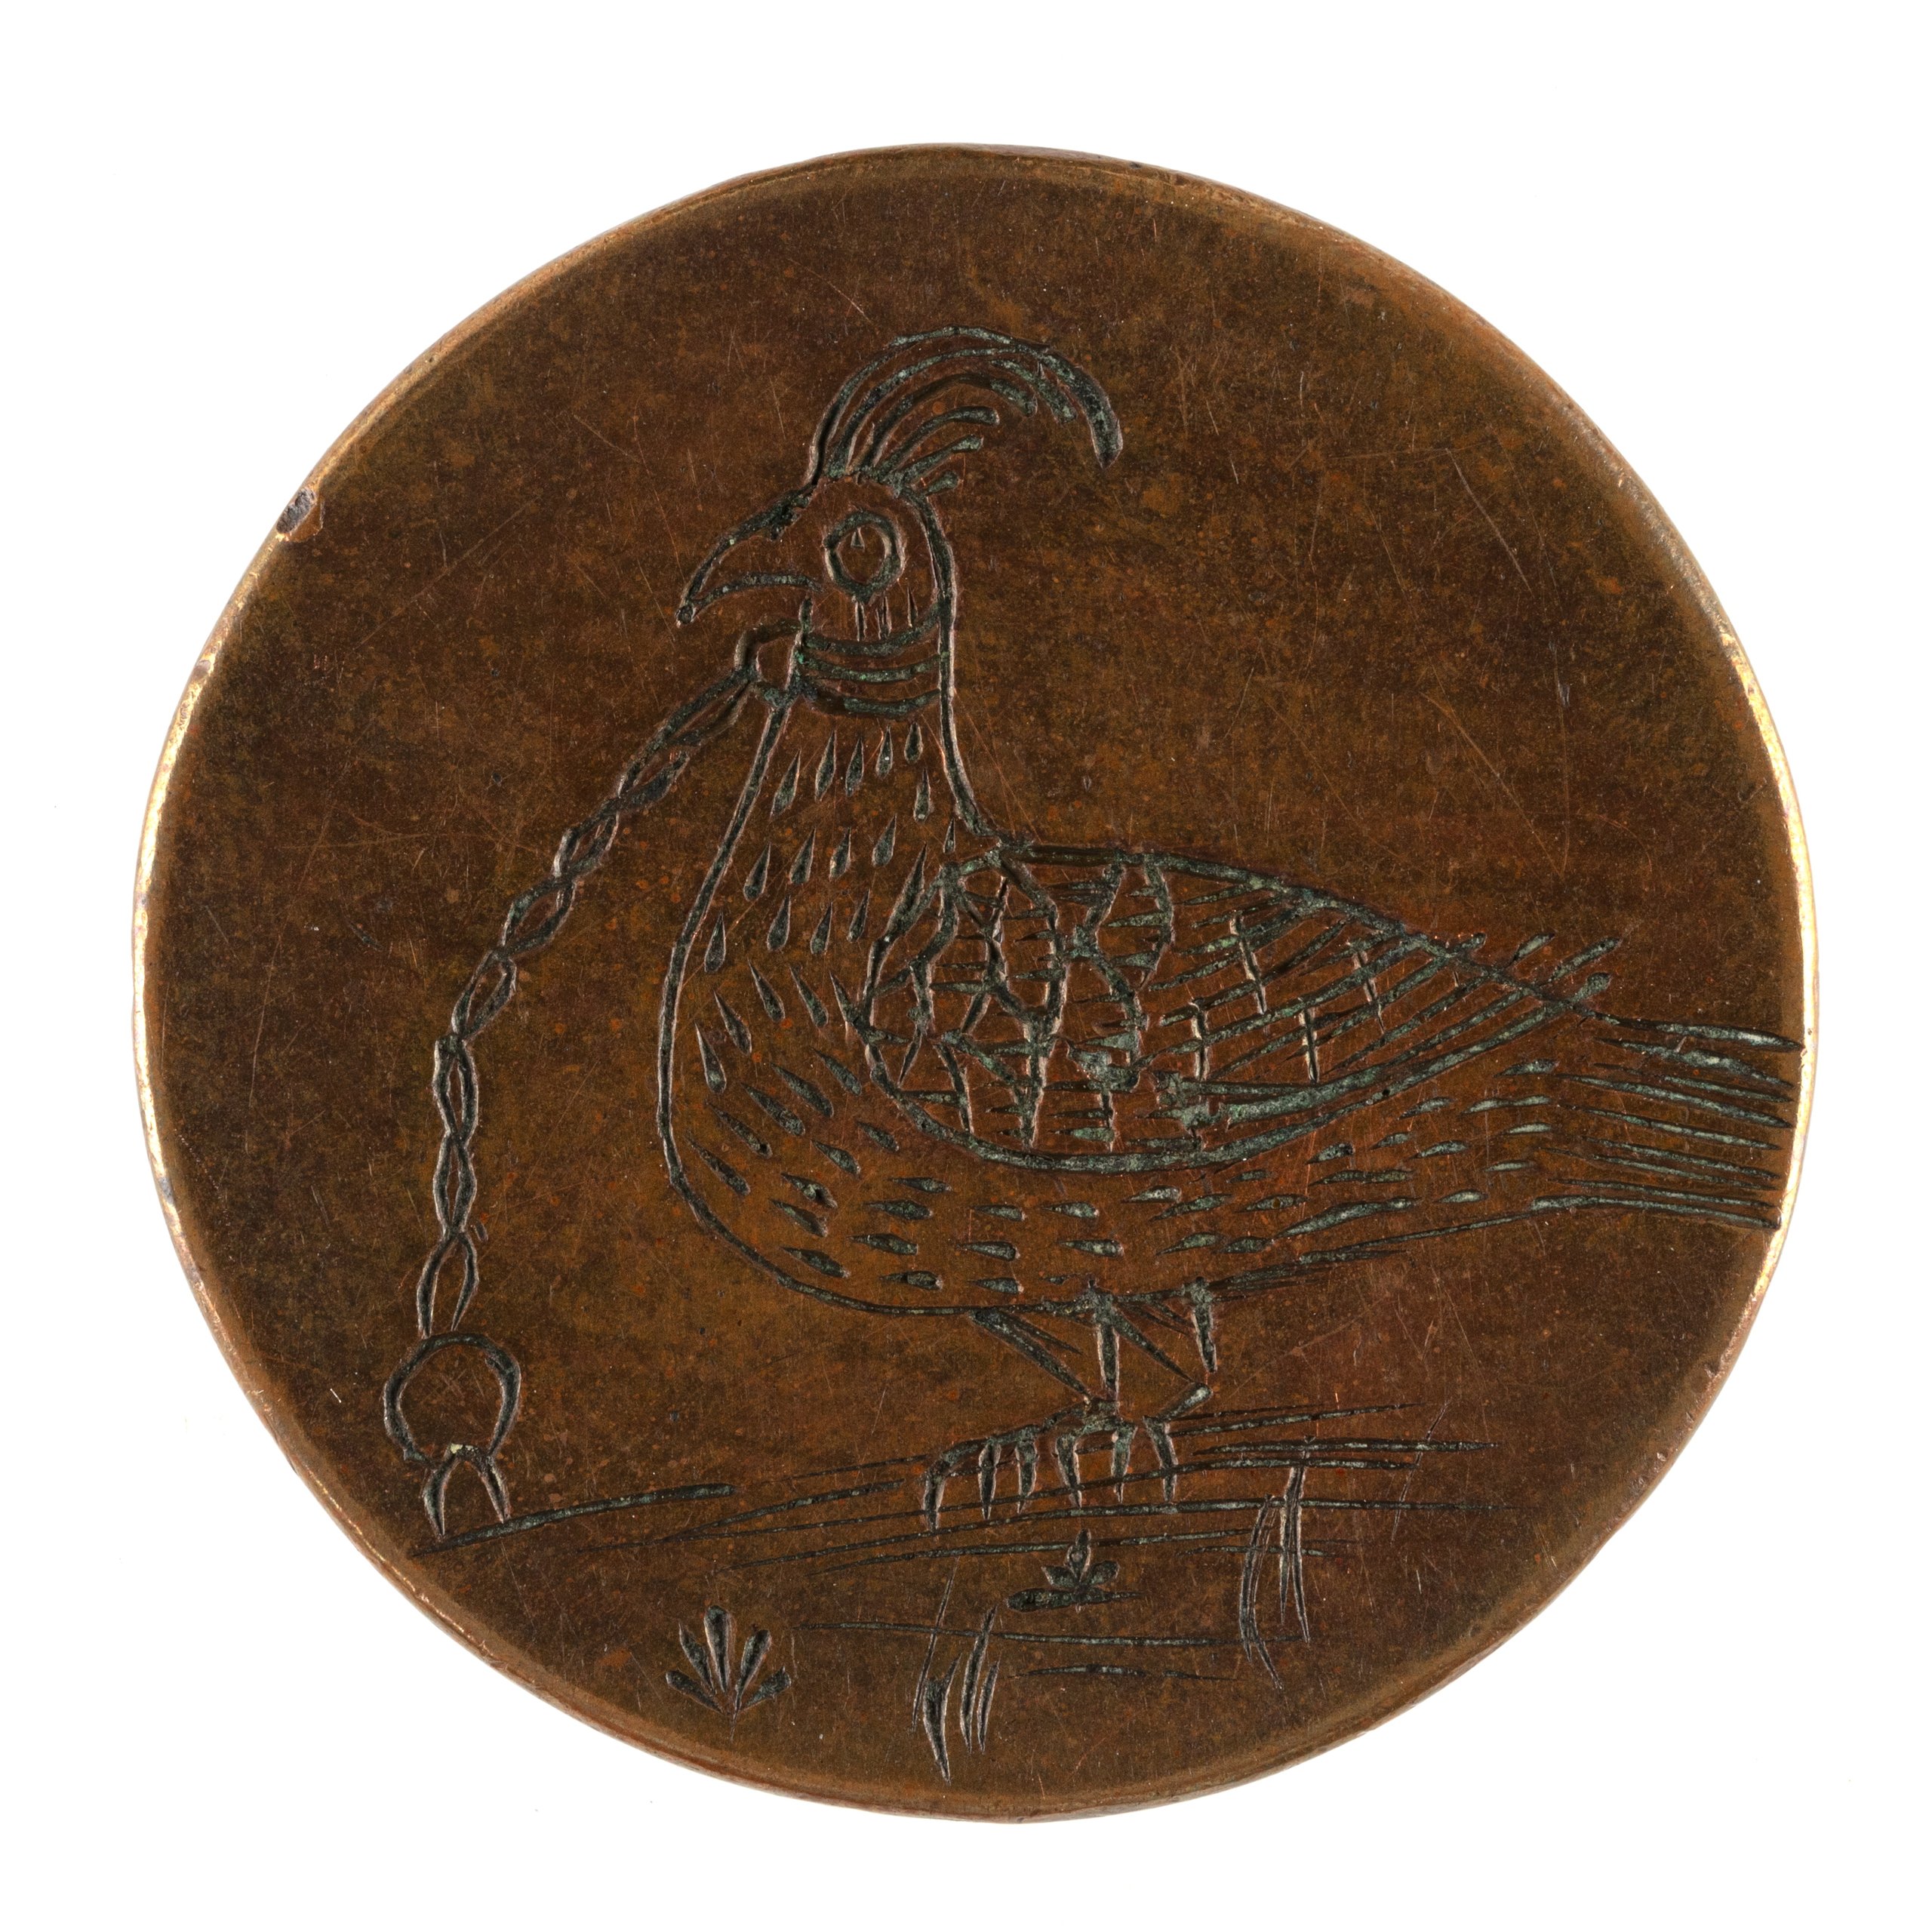 Convict love token engraved by Thomas Tilley